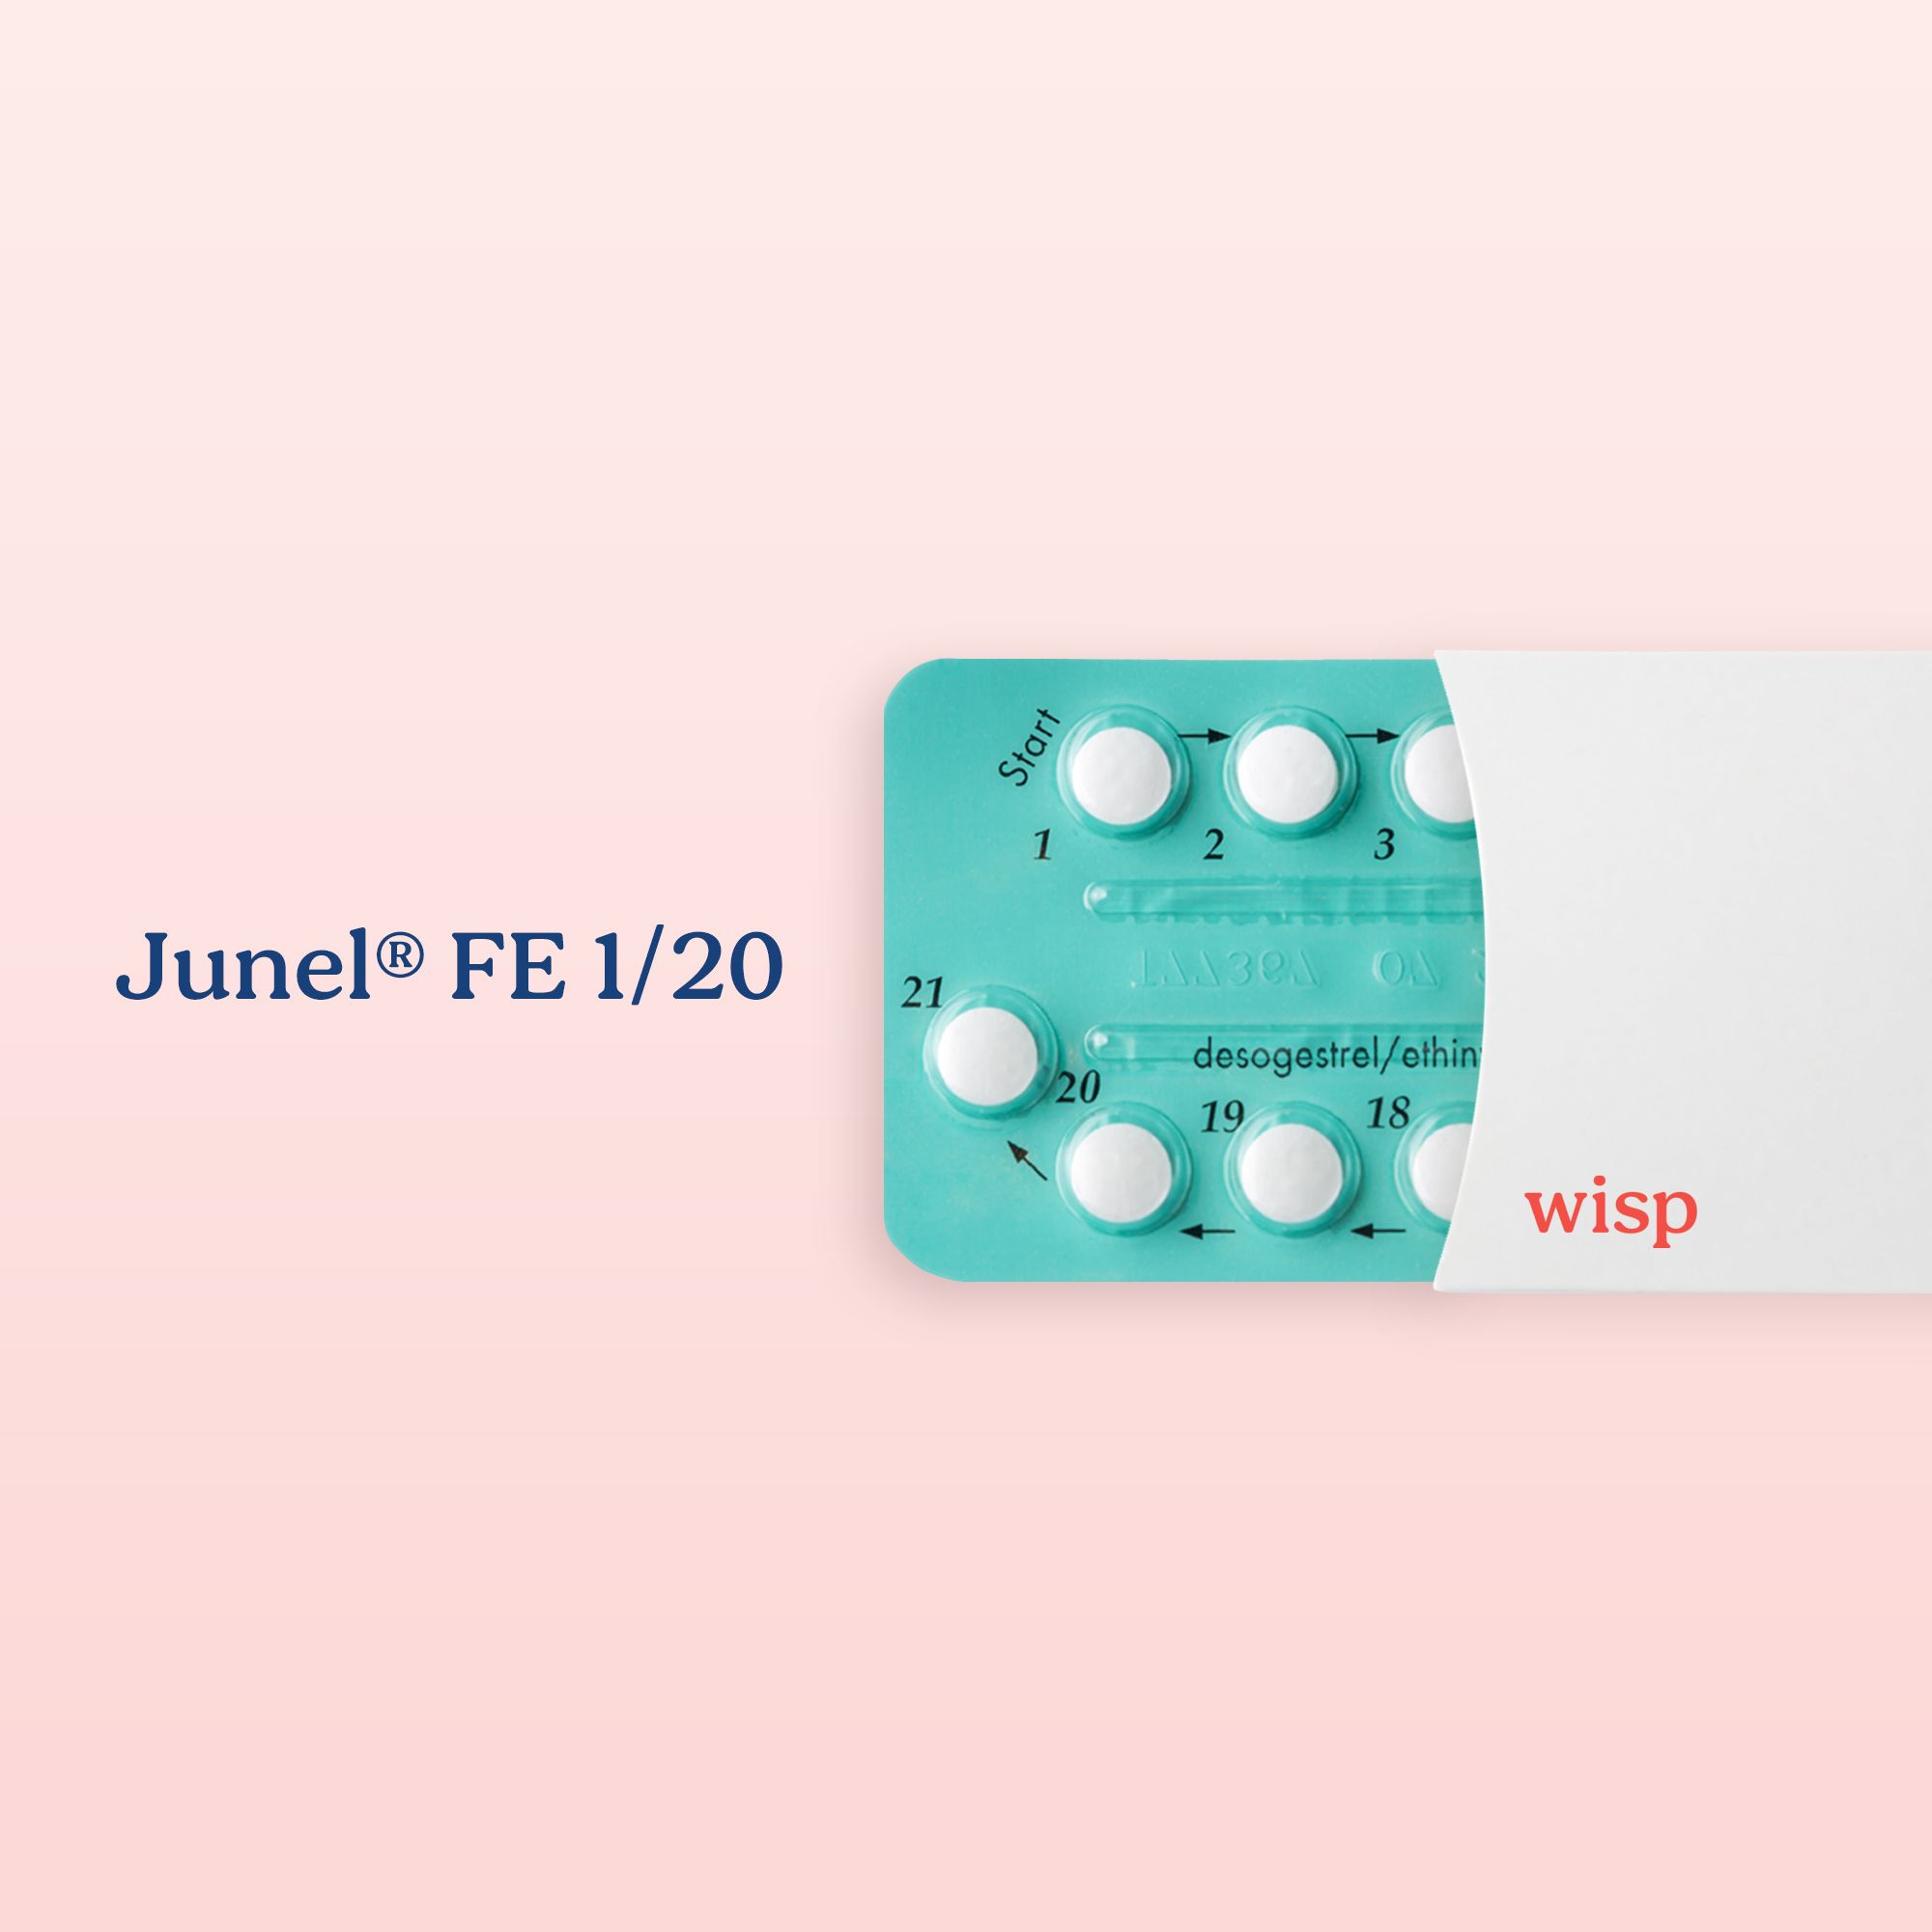 Packet of Junel FE birth control pills on a pink background